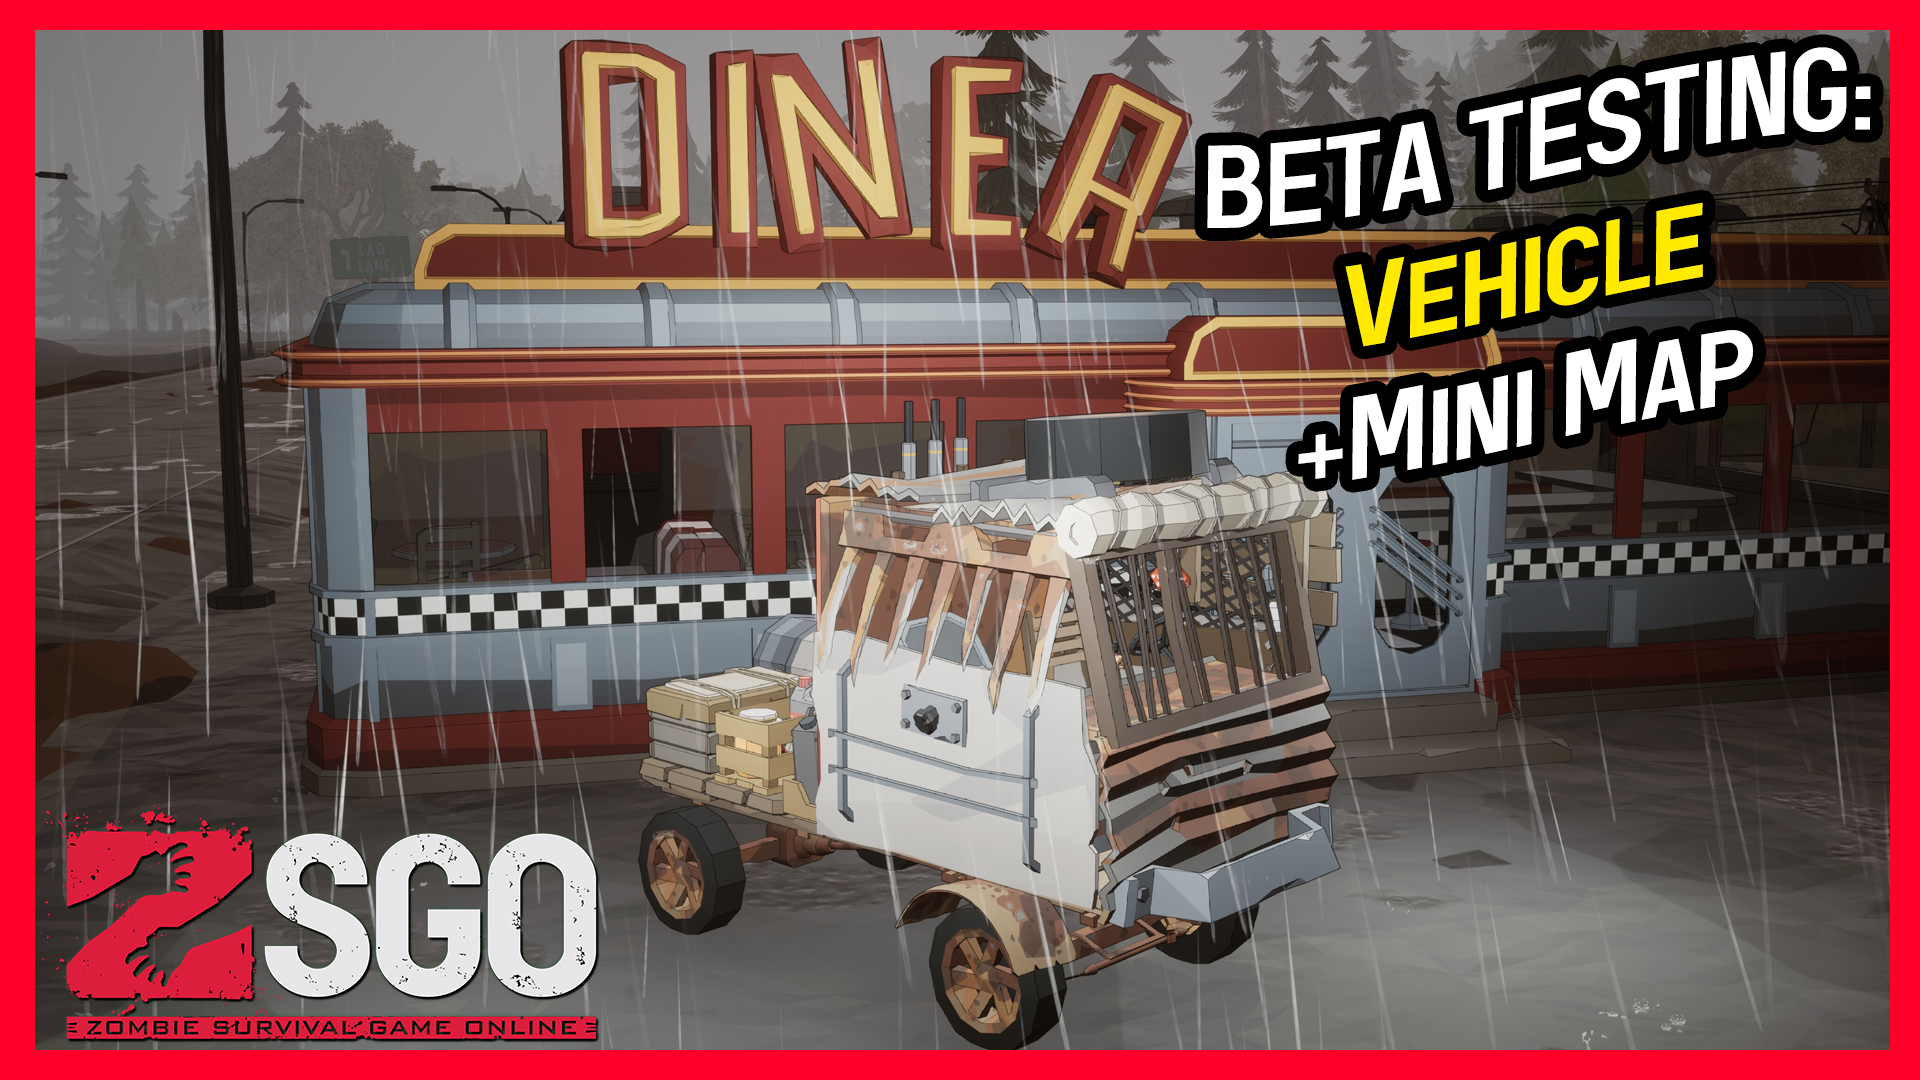 The new ZSGO vehicle named the Dumbelo out in-front of the Diner.